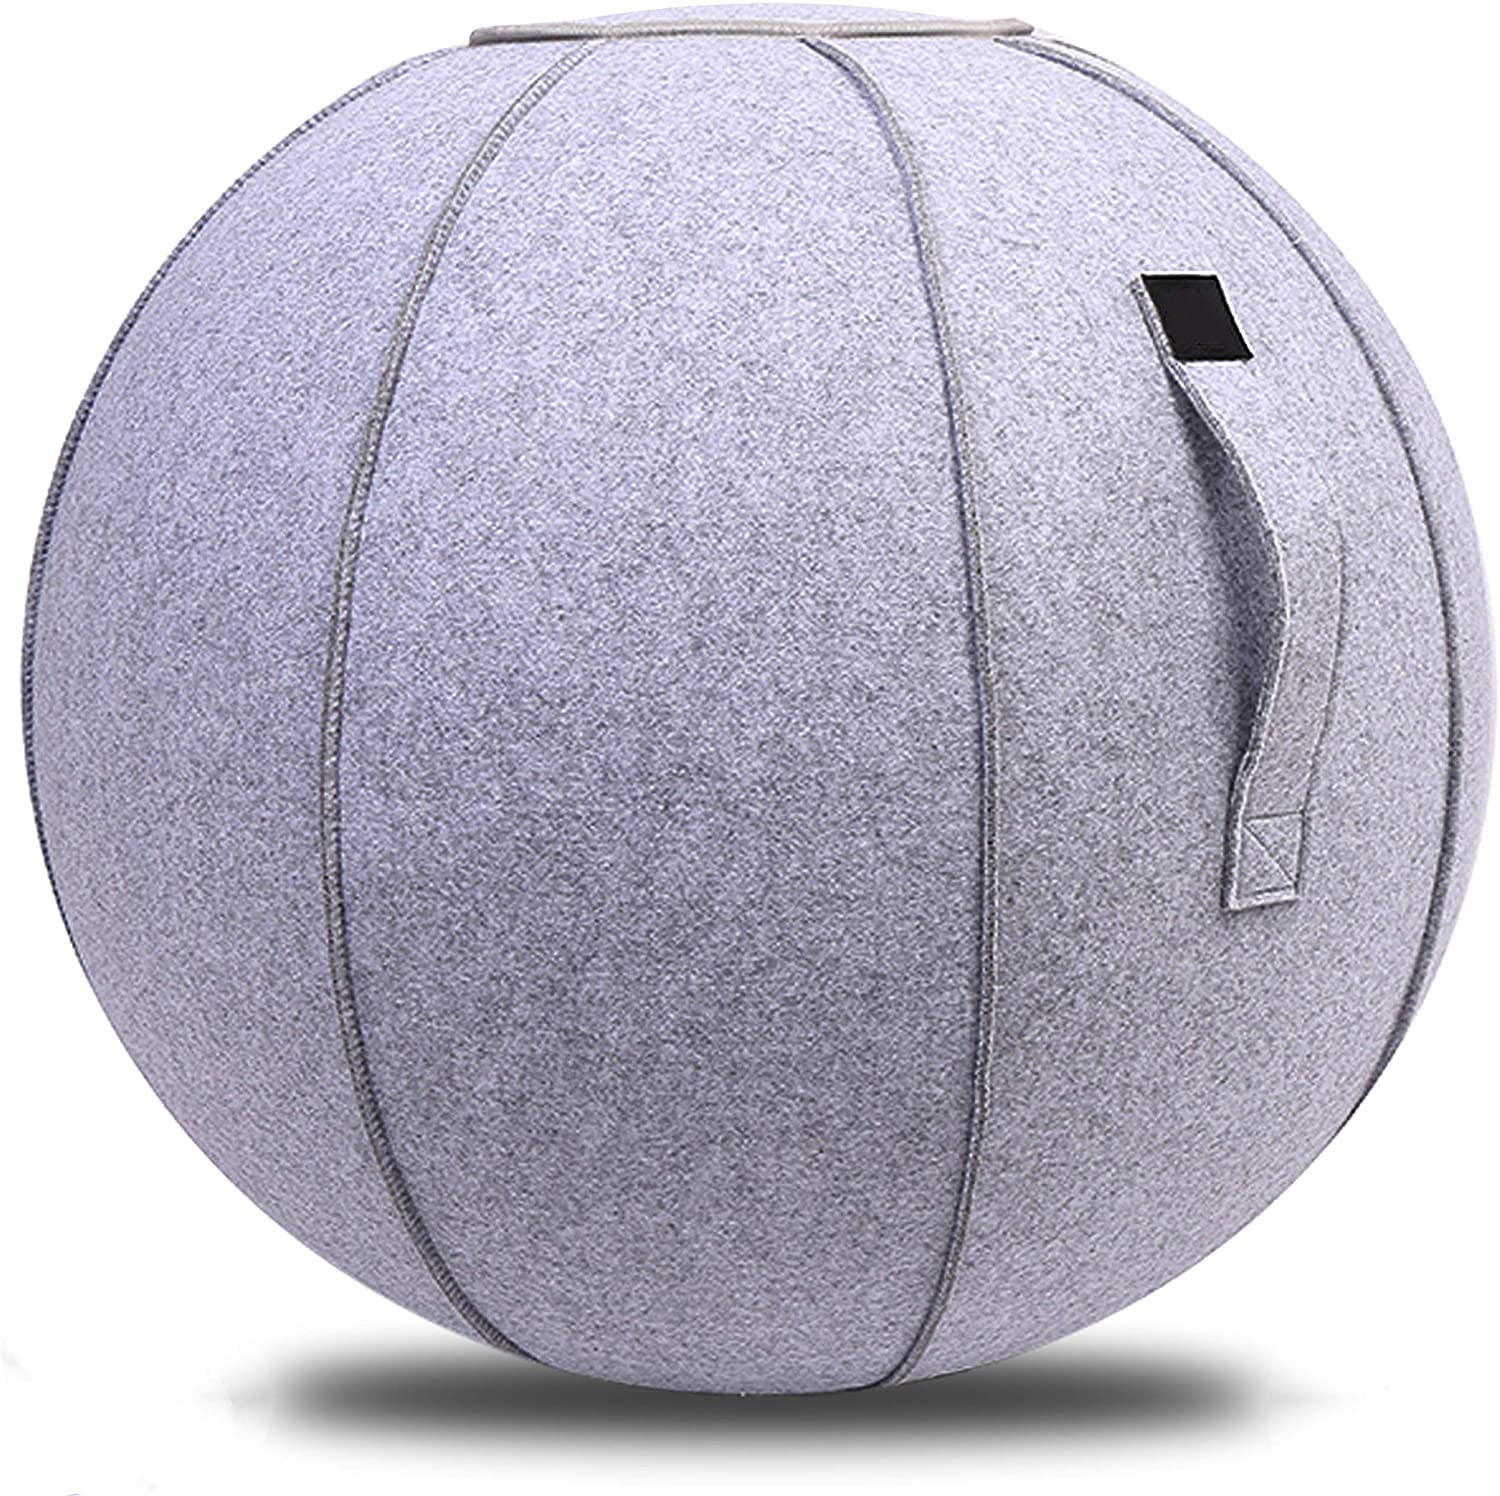 Sitting Ball Chair for Office Dorm and Home Lightweight Self Standing Ergonomic 